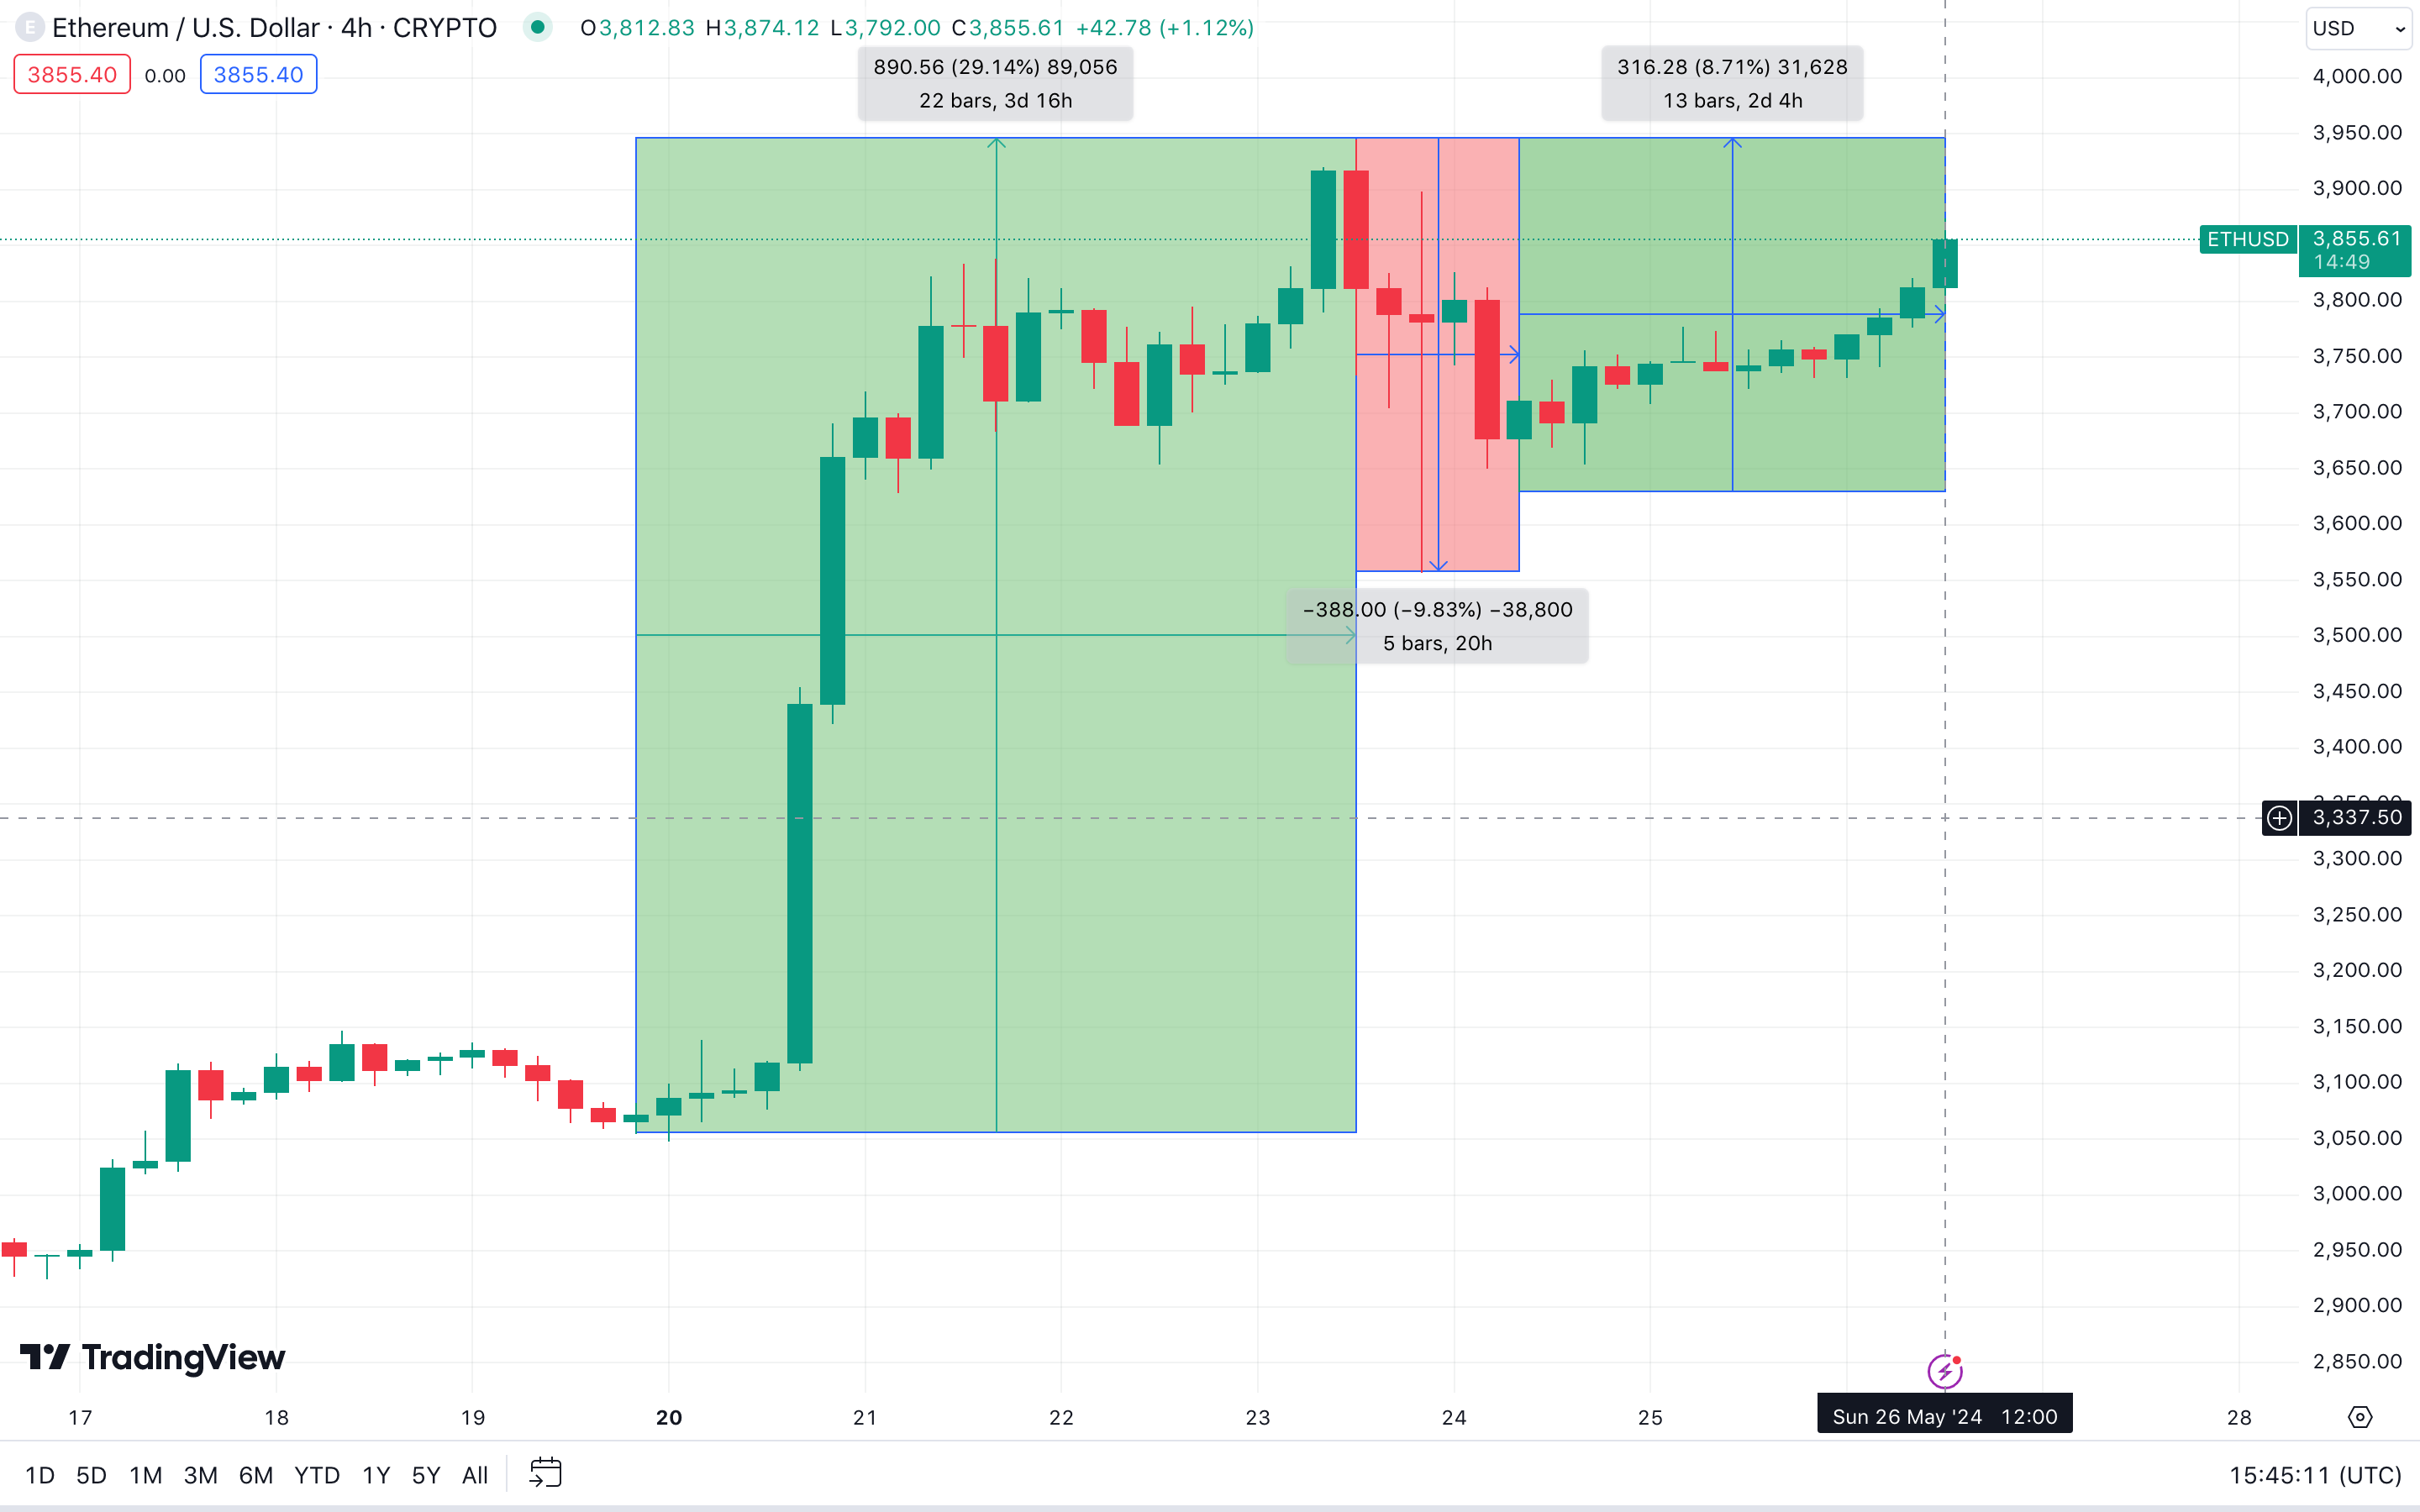 Ethereum (ETH) Price Action After ETH Approval